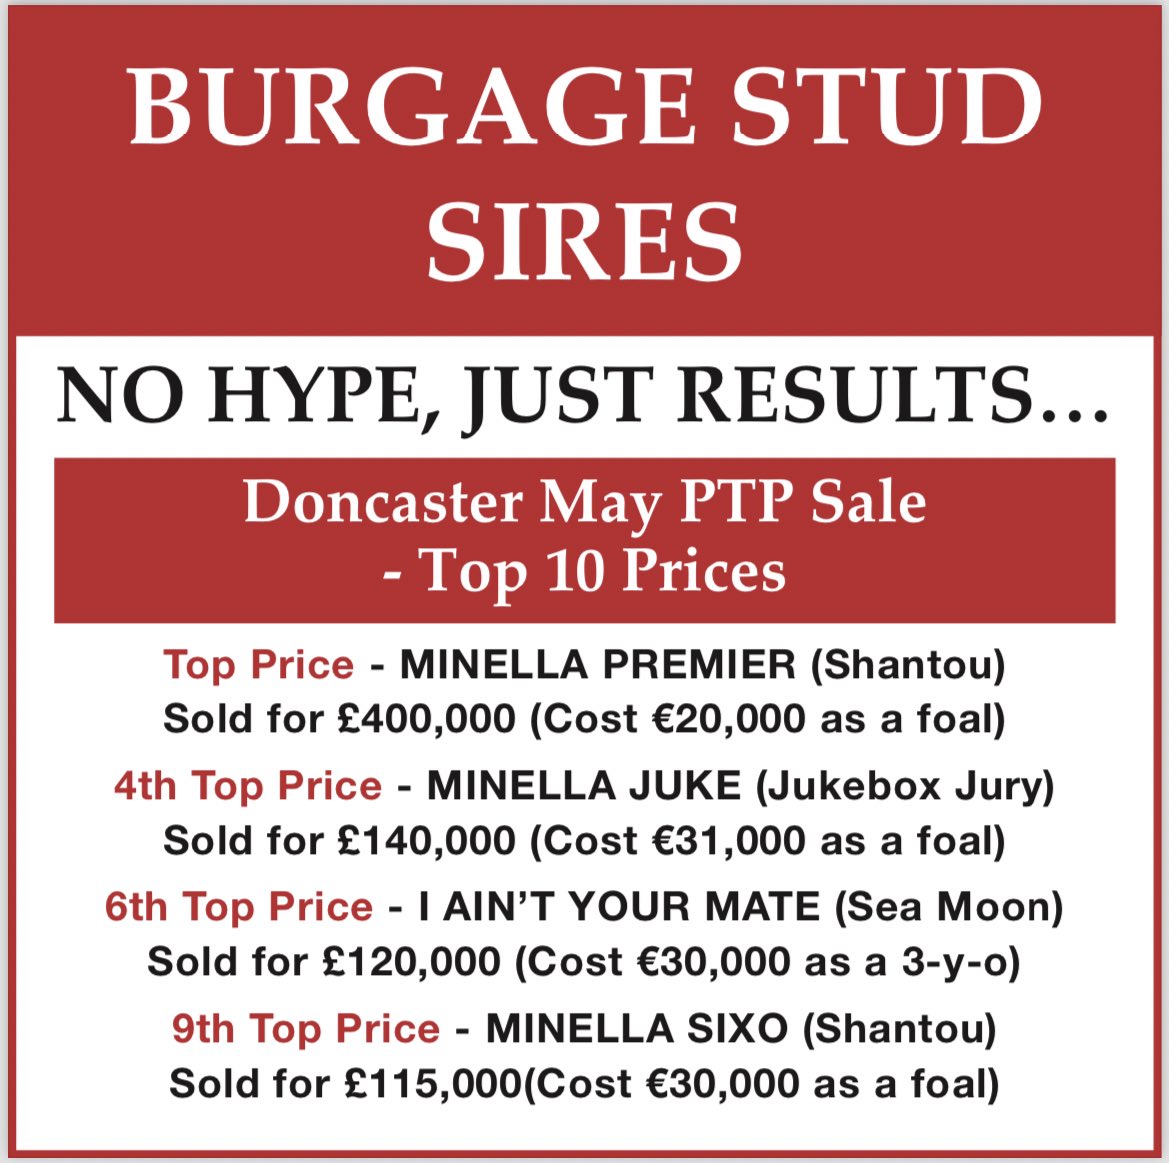 Super results for @BurgageStud stallions @GoffsUK Spring HIT sale yesterday 📈 Great returns for those who have supported our stallions by breeding to them and buying them in the ring💰 Get in touch to book your mare in now 📞 #FascinatingRock #SeaMoon #JukeboxJury